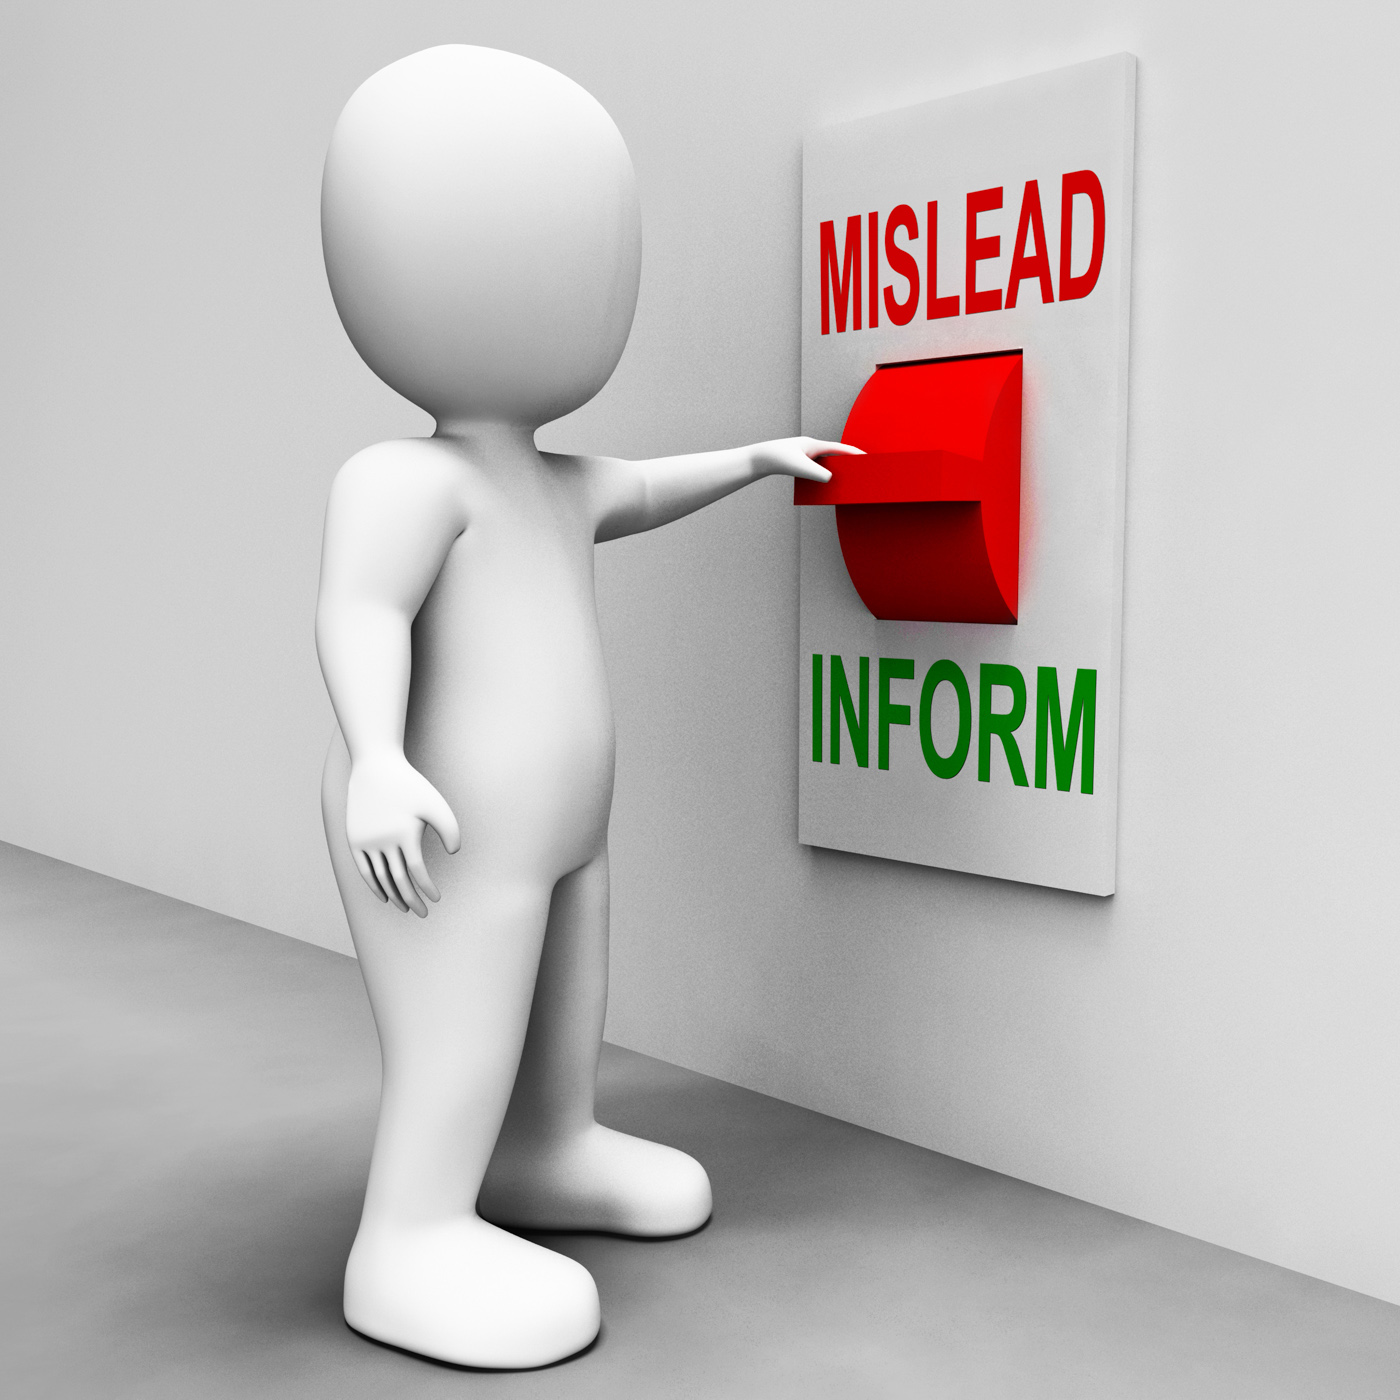 Mislead inform switch shows misleading or informative advice photo